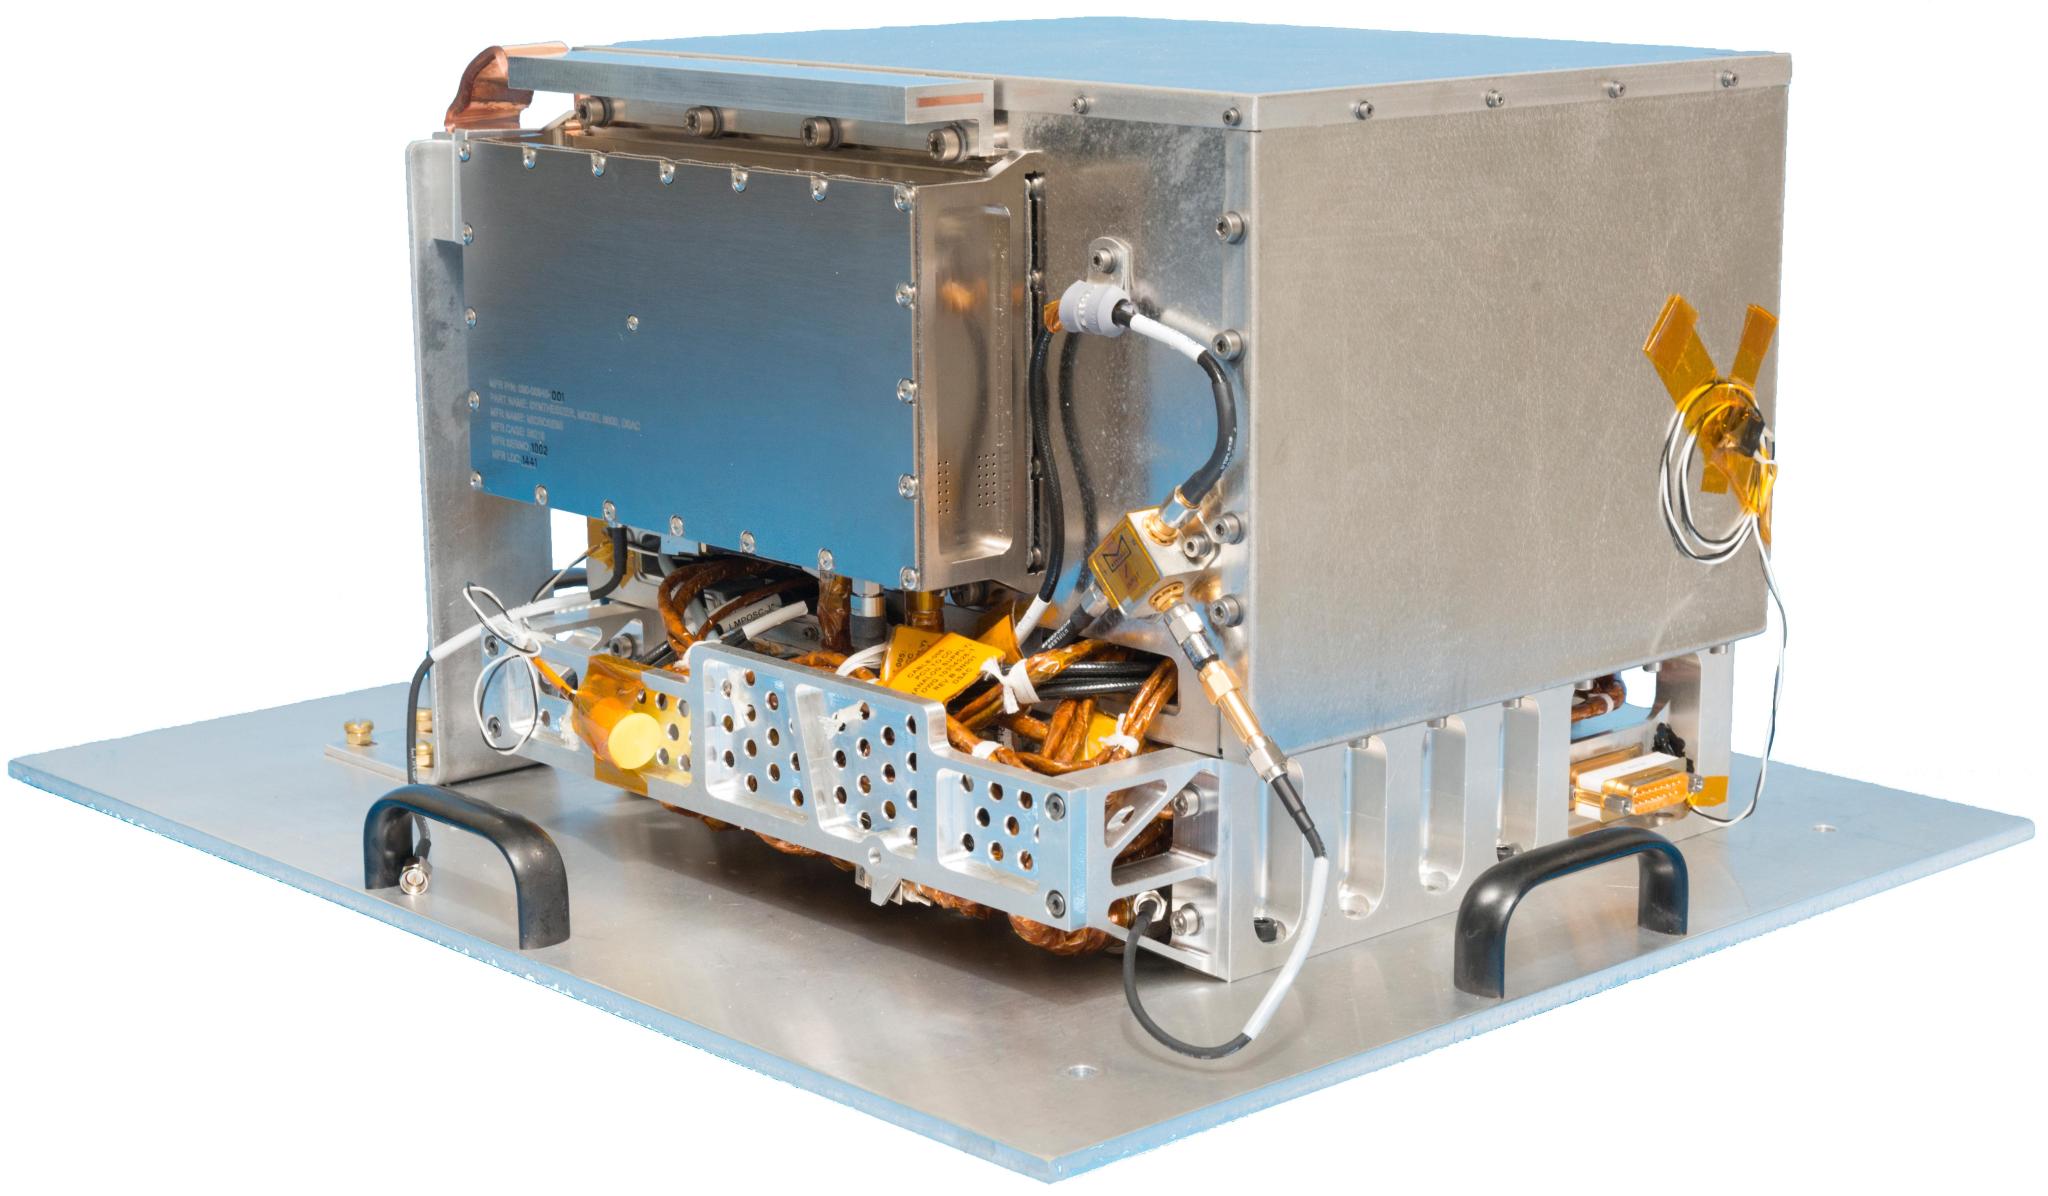 The Deep Space Atomic Clock is about 10 inches (25 centimeters) on each side, roughly the size of a toaster.